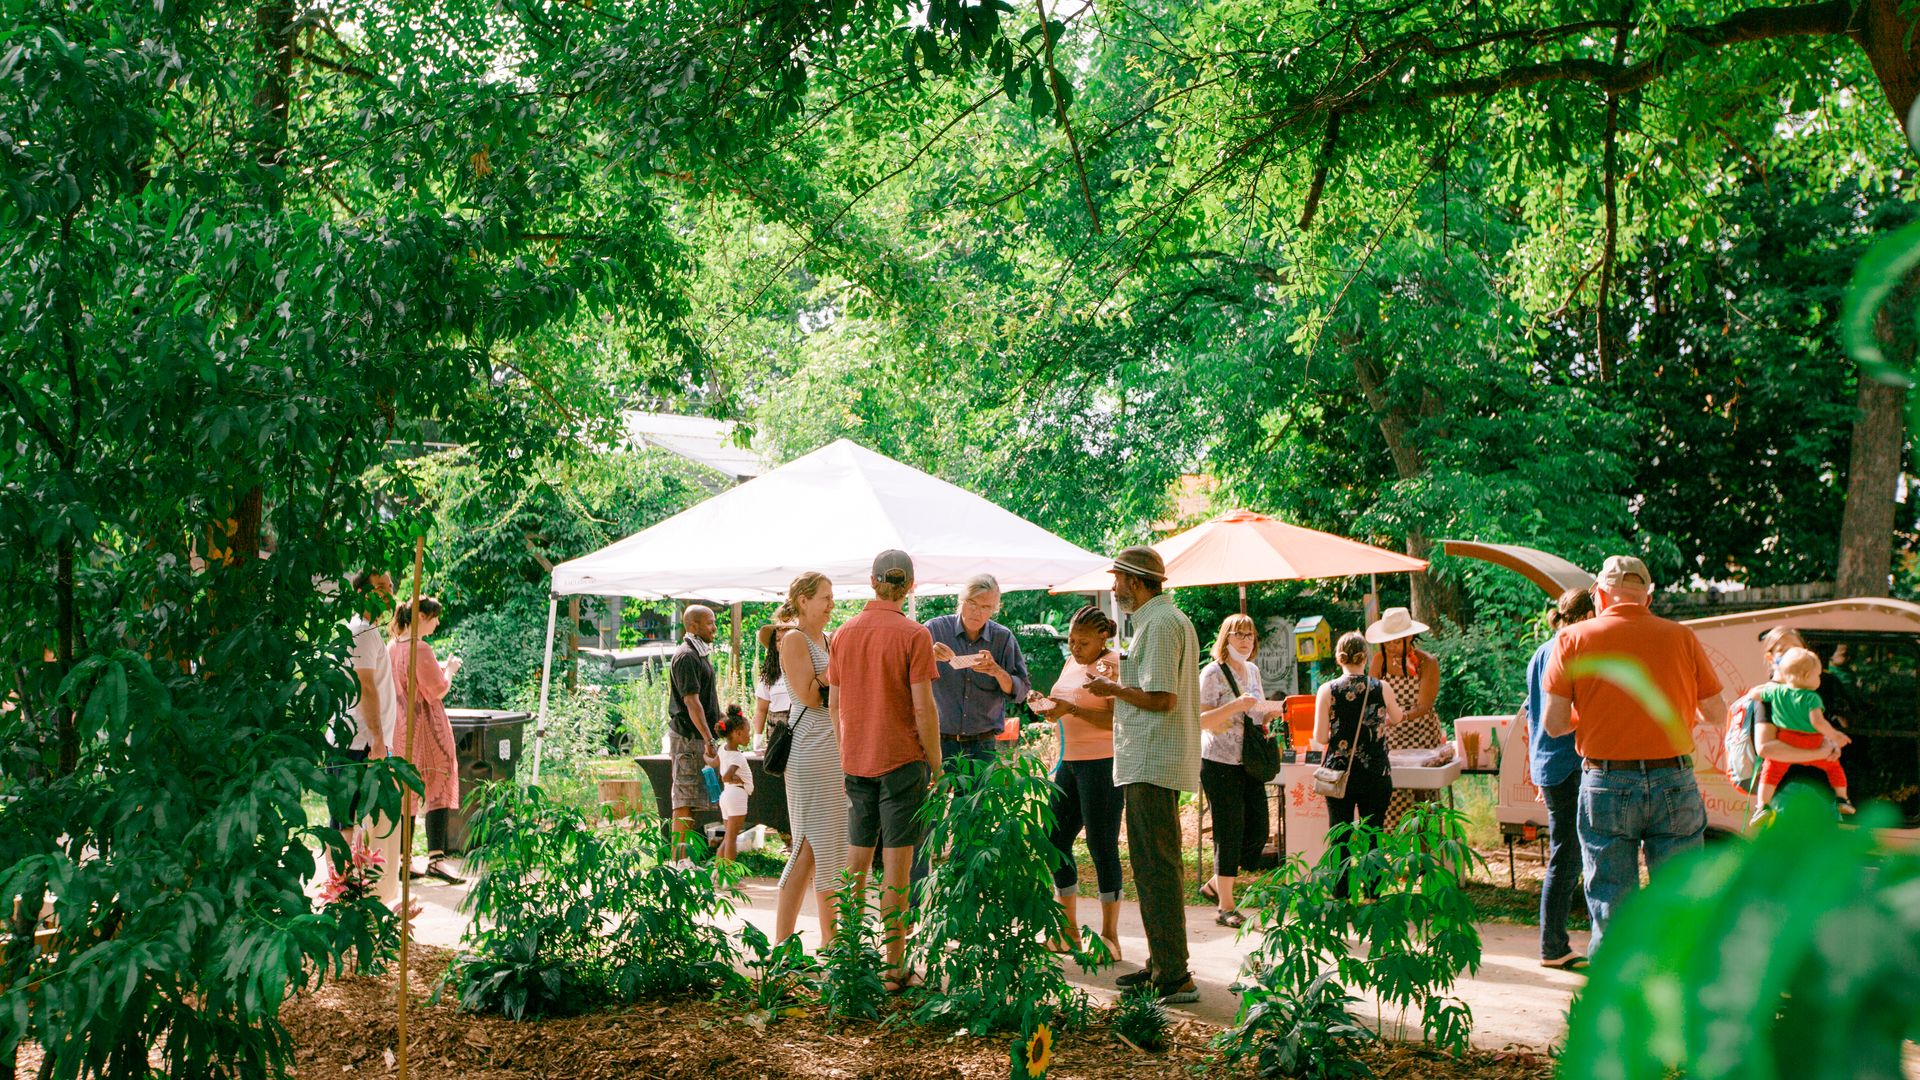 People talk, sample food, and peruse vendor stands at a lush green farmers market in East Atlanta Village